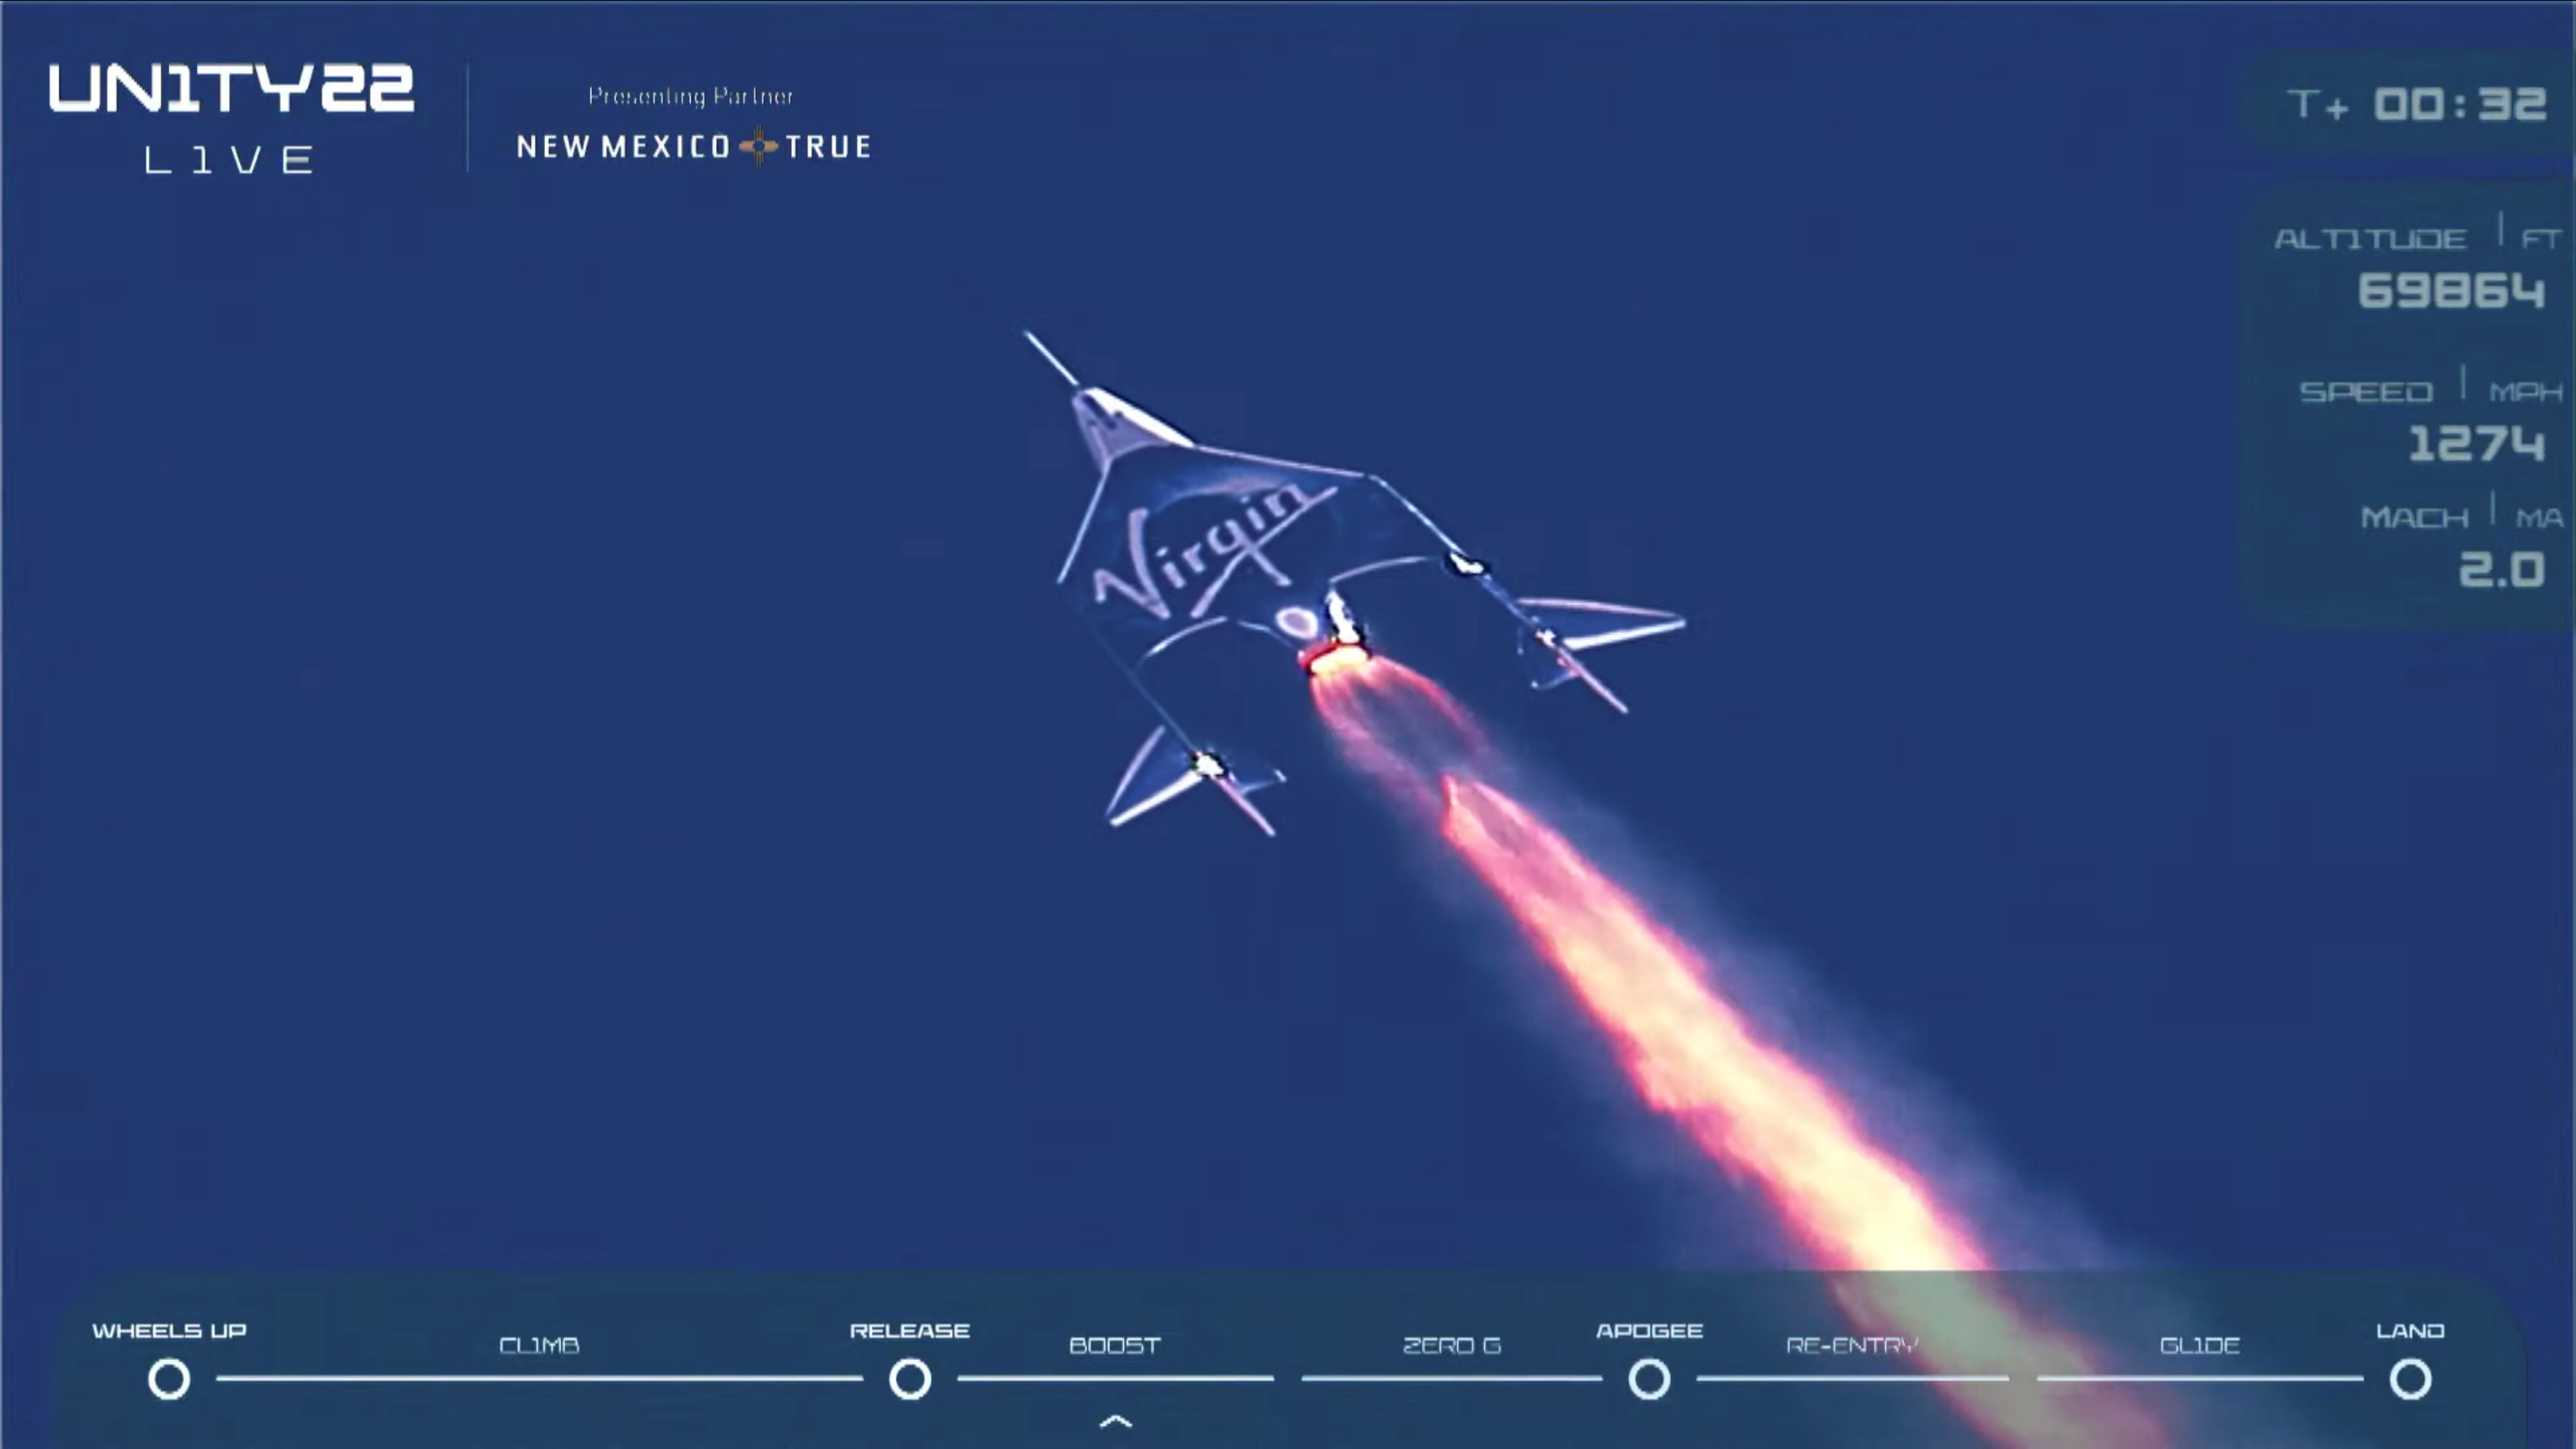 Virgin Galactic's passenger rocket plane VSS Unity starts its ascent to the edge of space